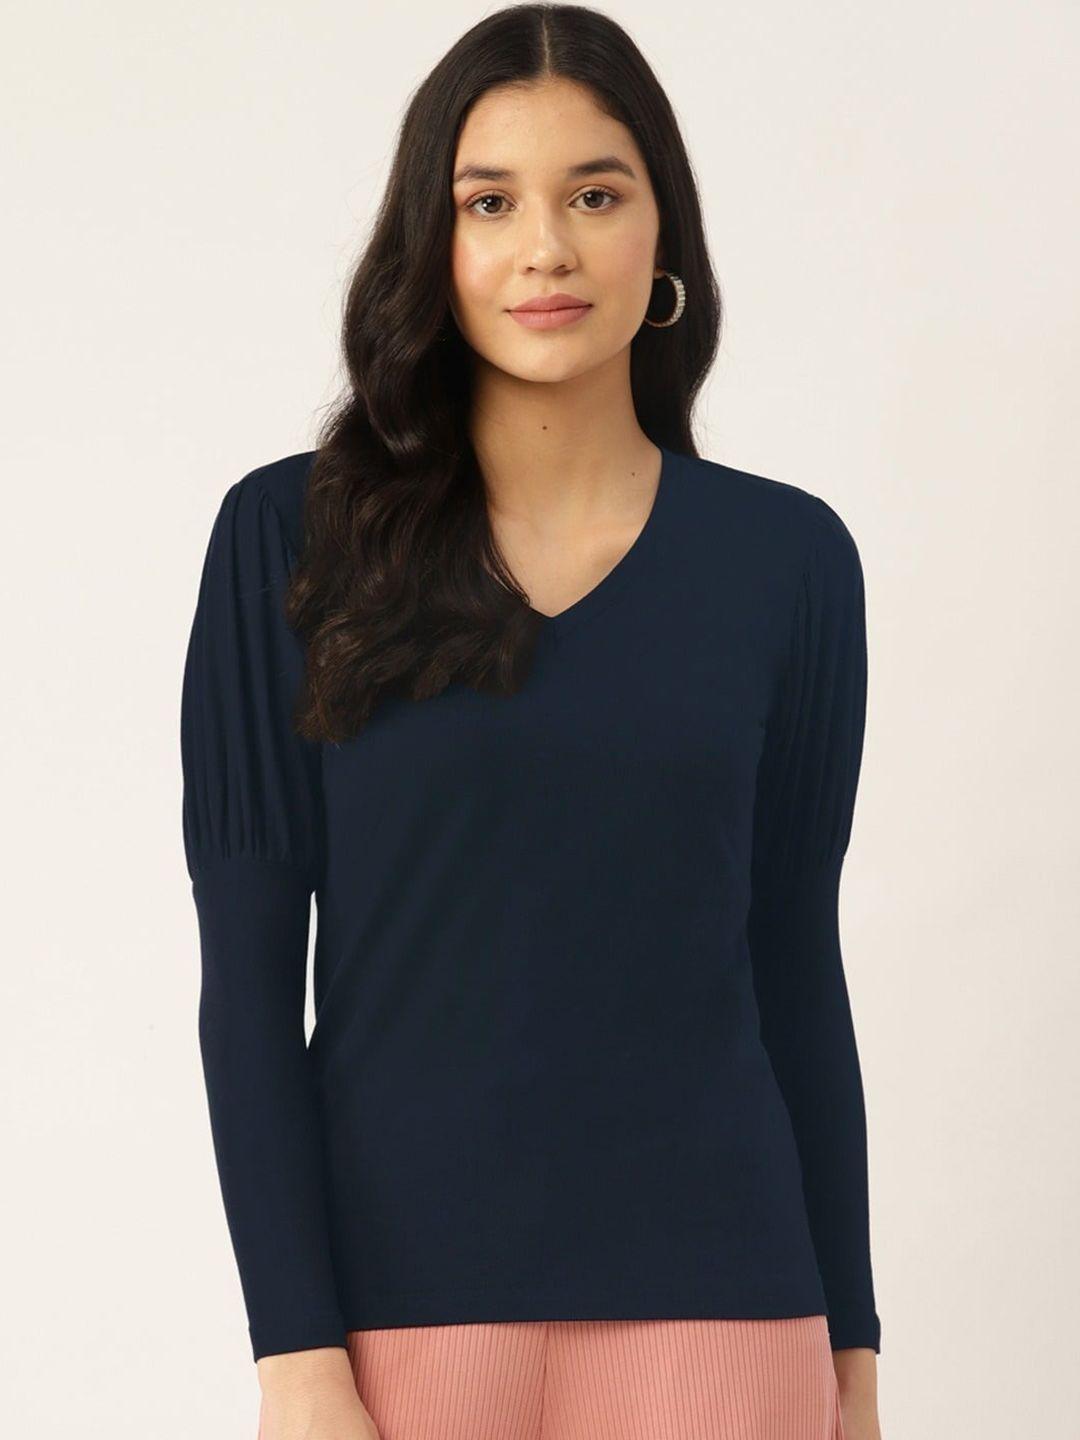 unmade v-neck puff sleeves top